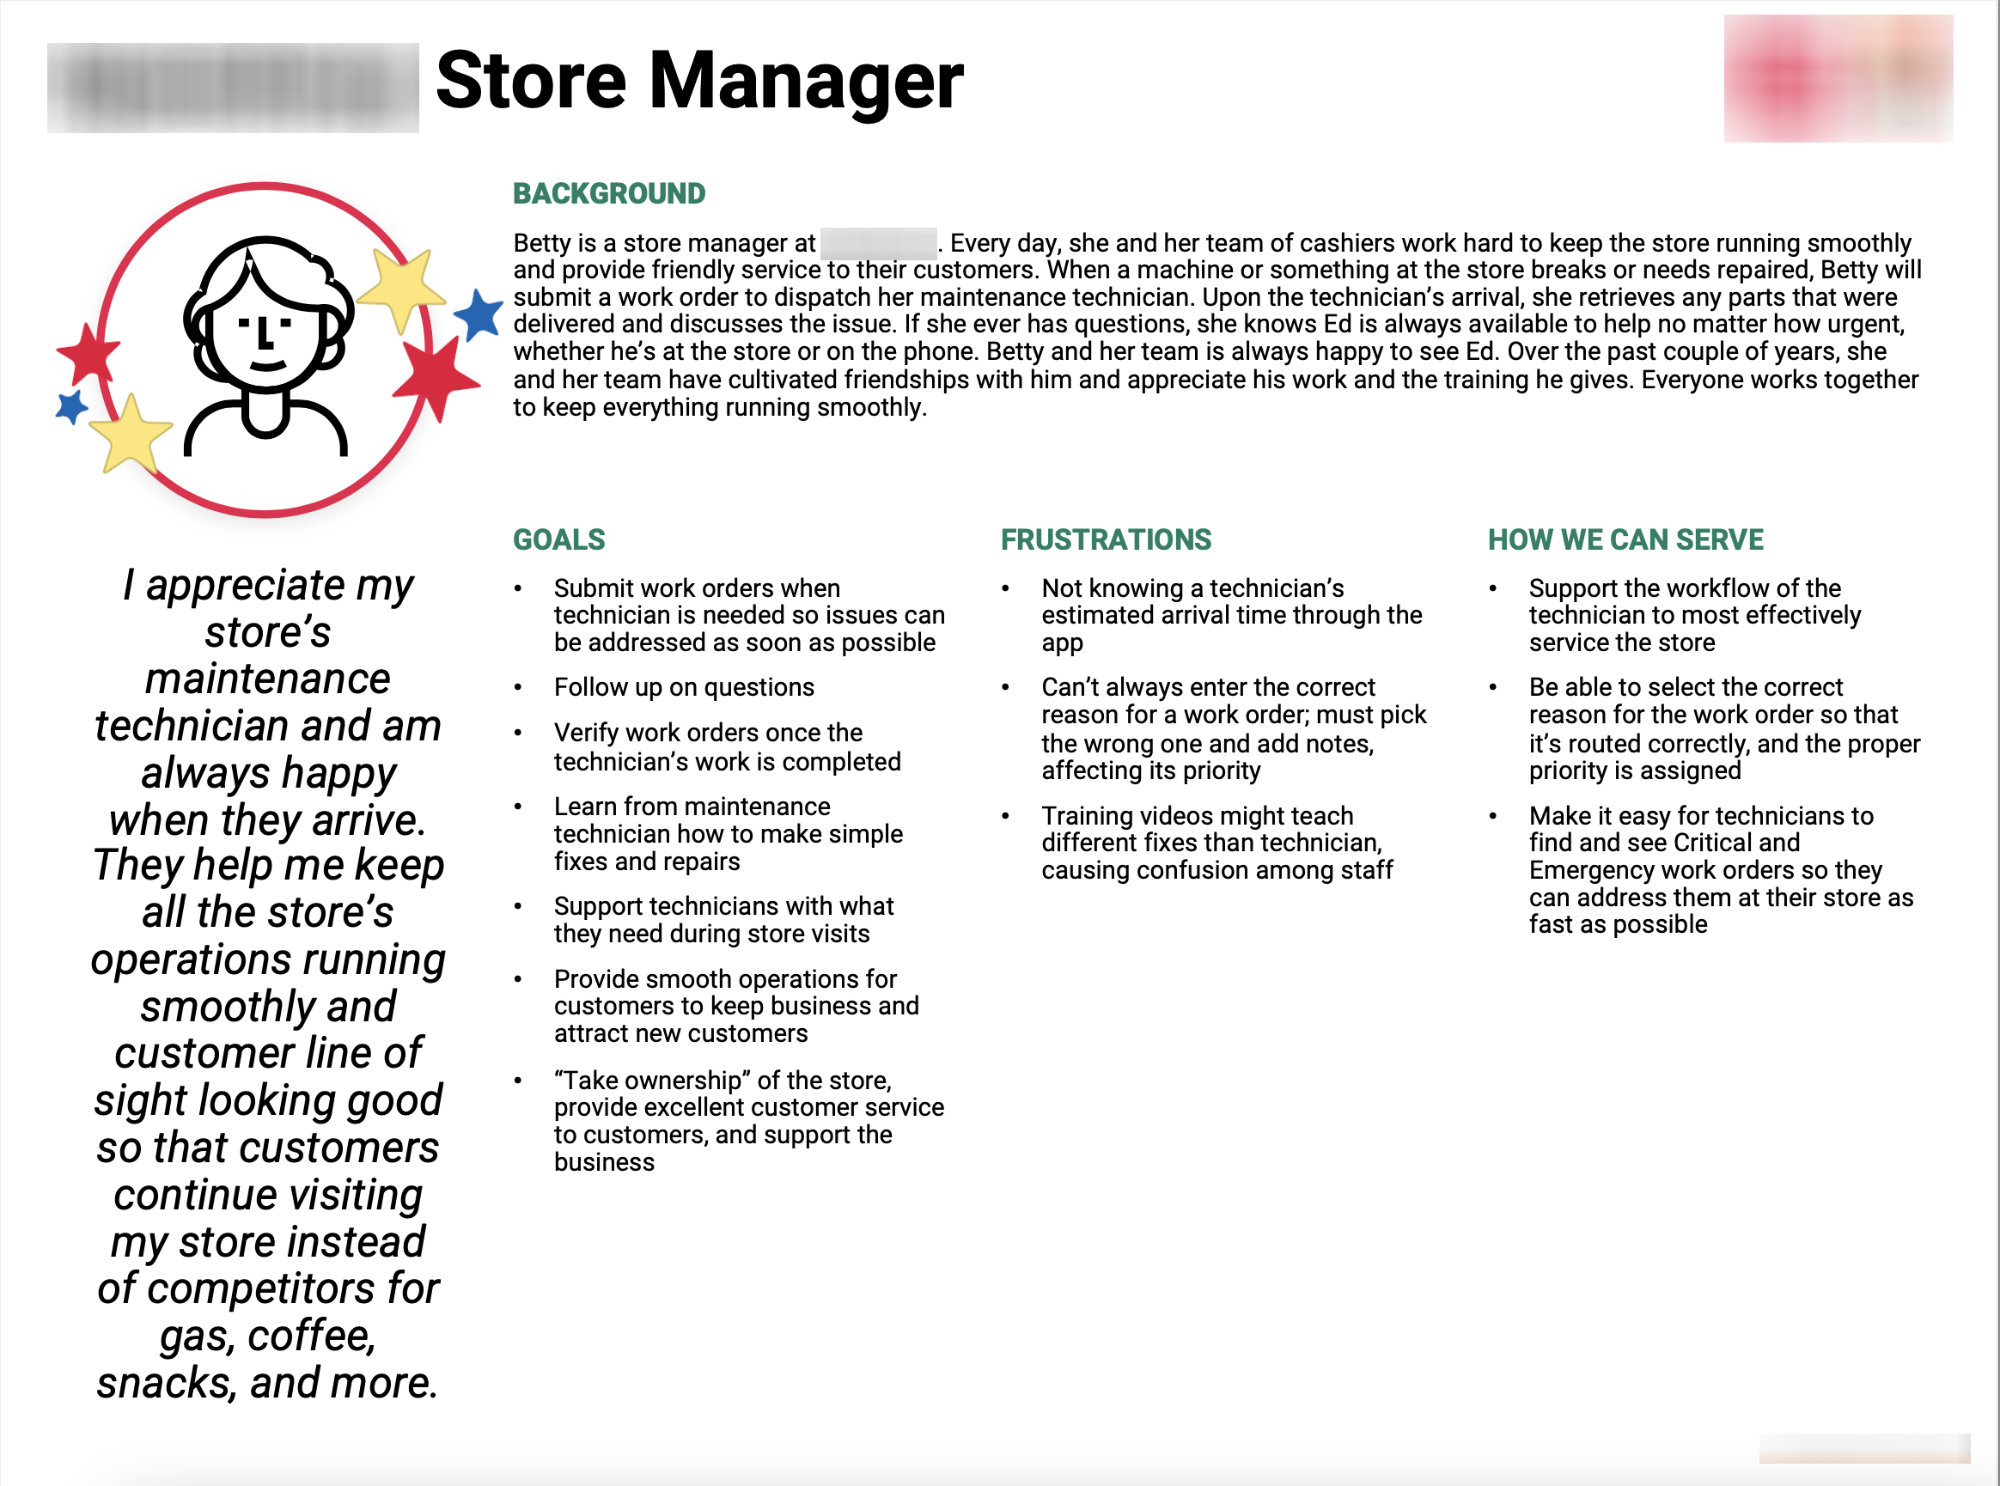 Persona for Store Manager